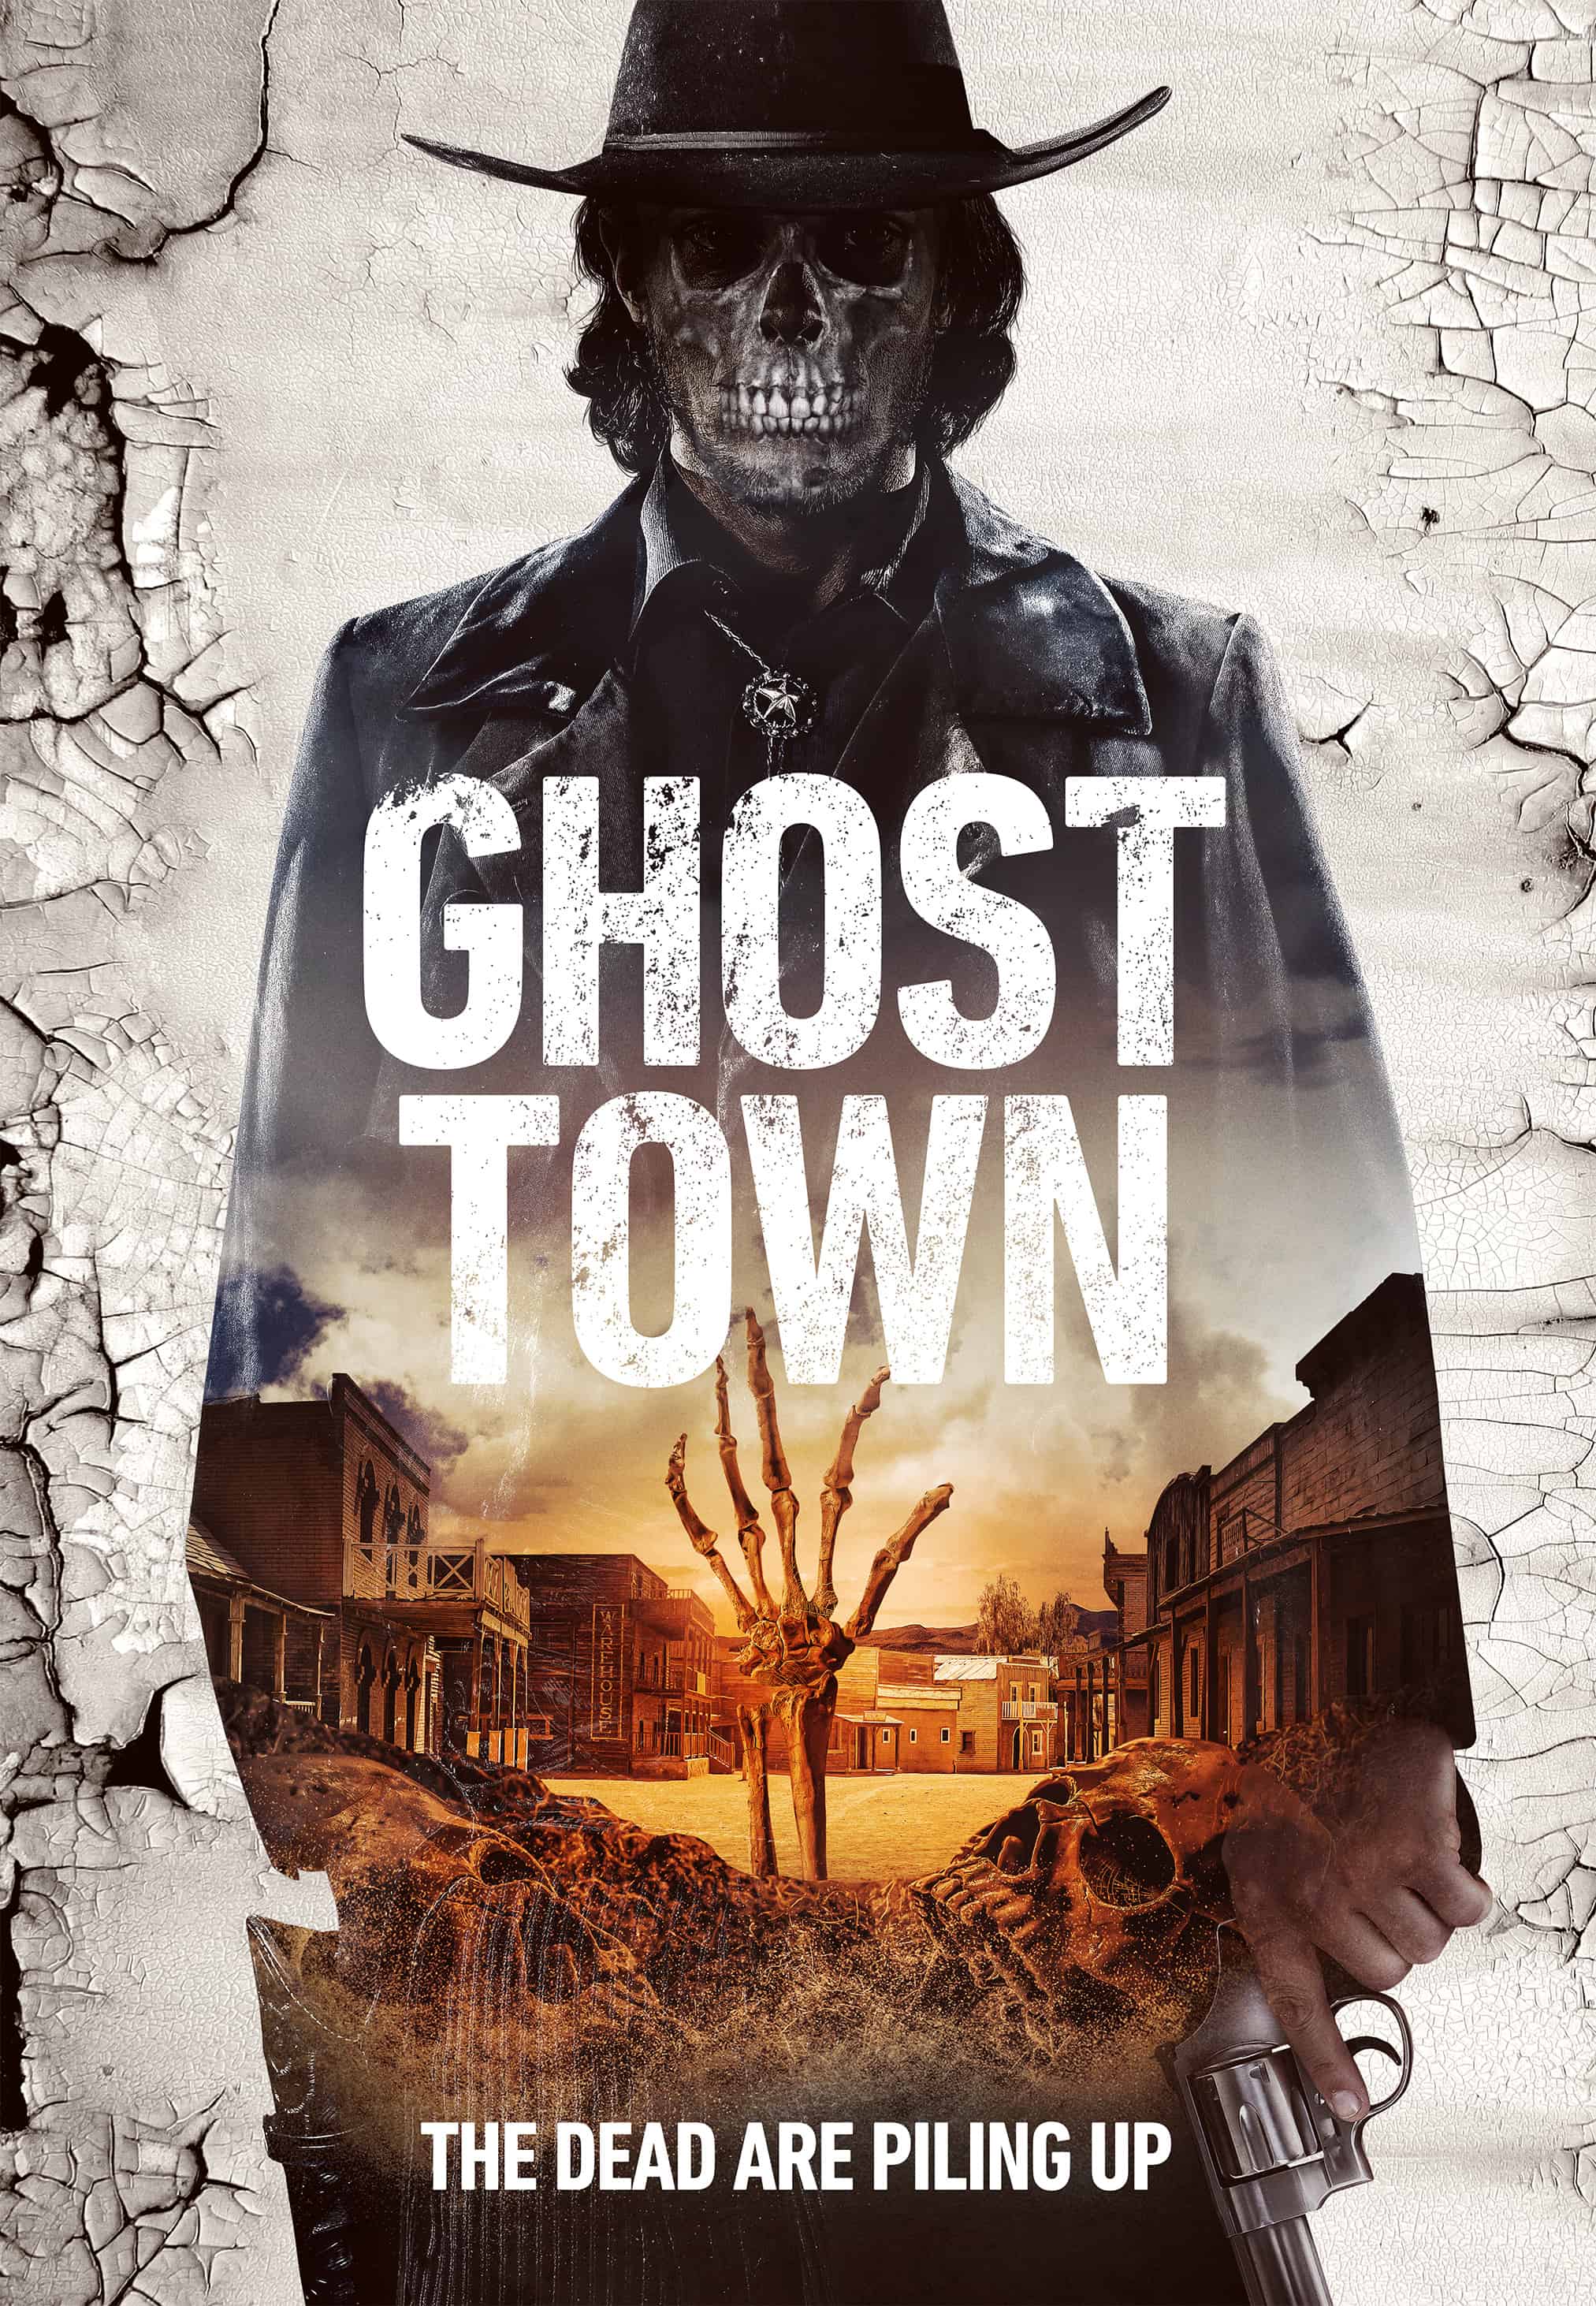 Ghost Town offers up a poster and trailer arrives March 7th 22